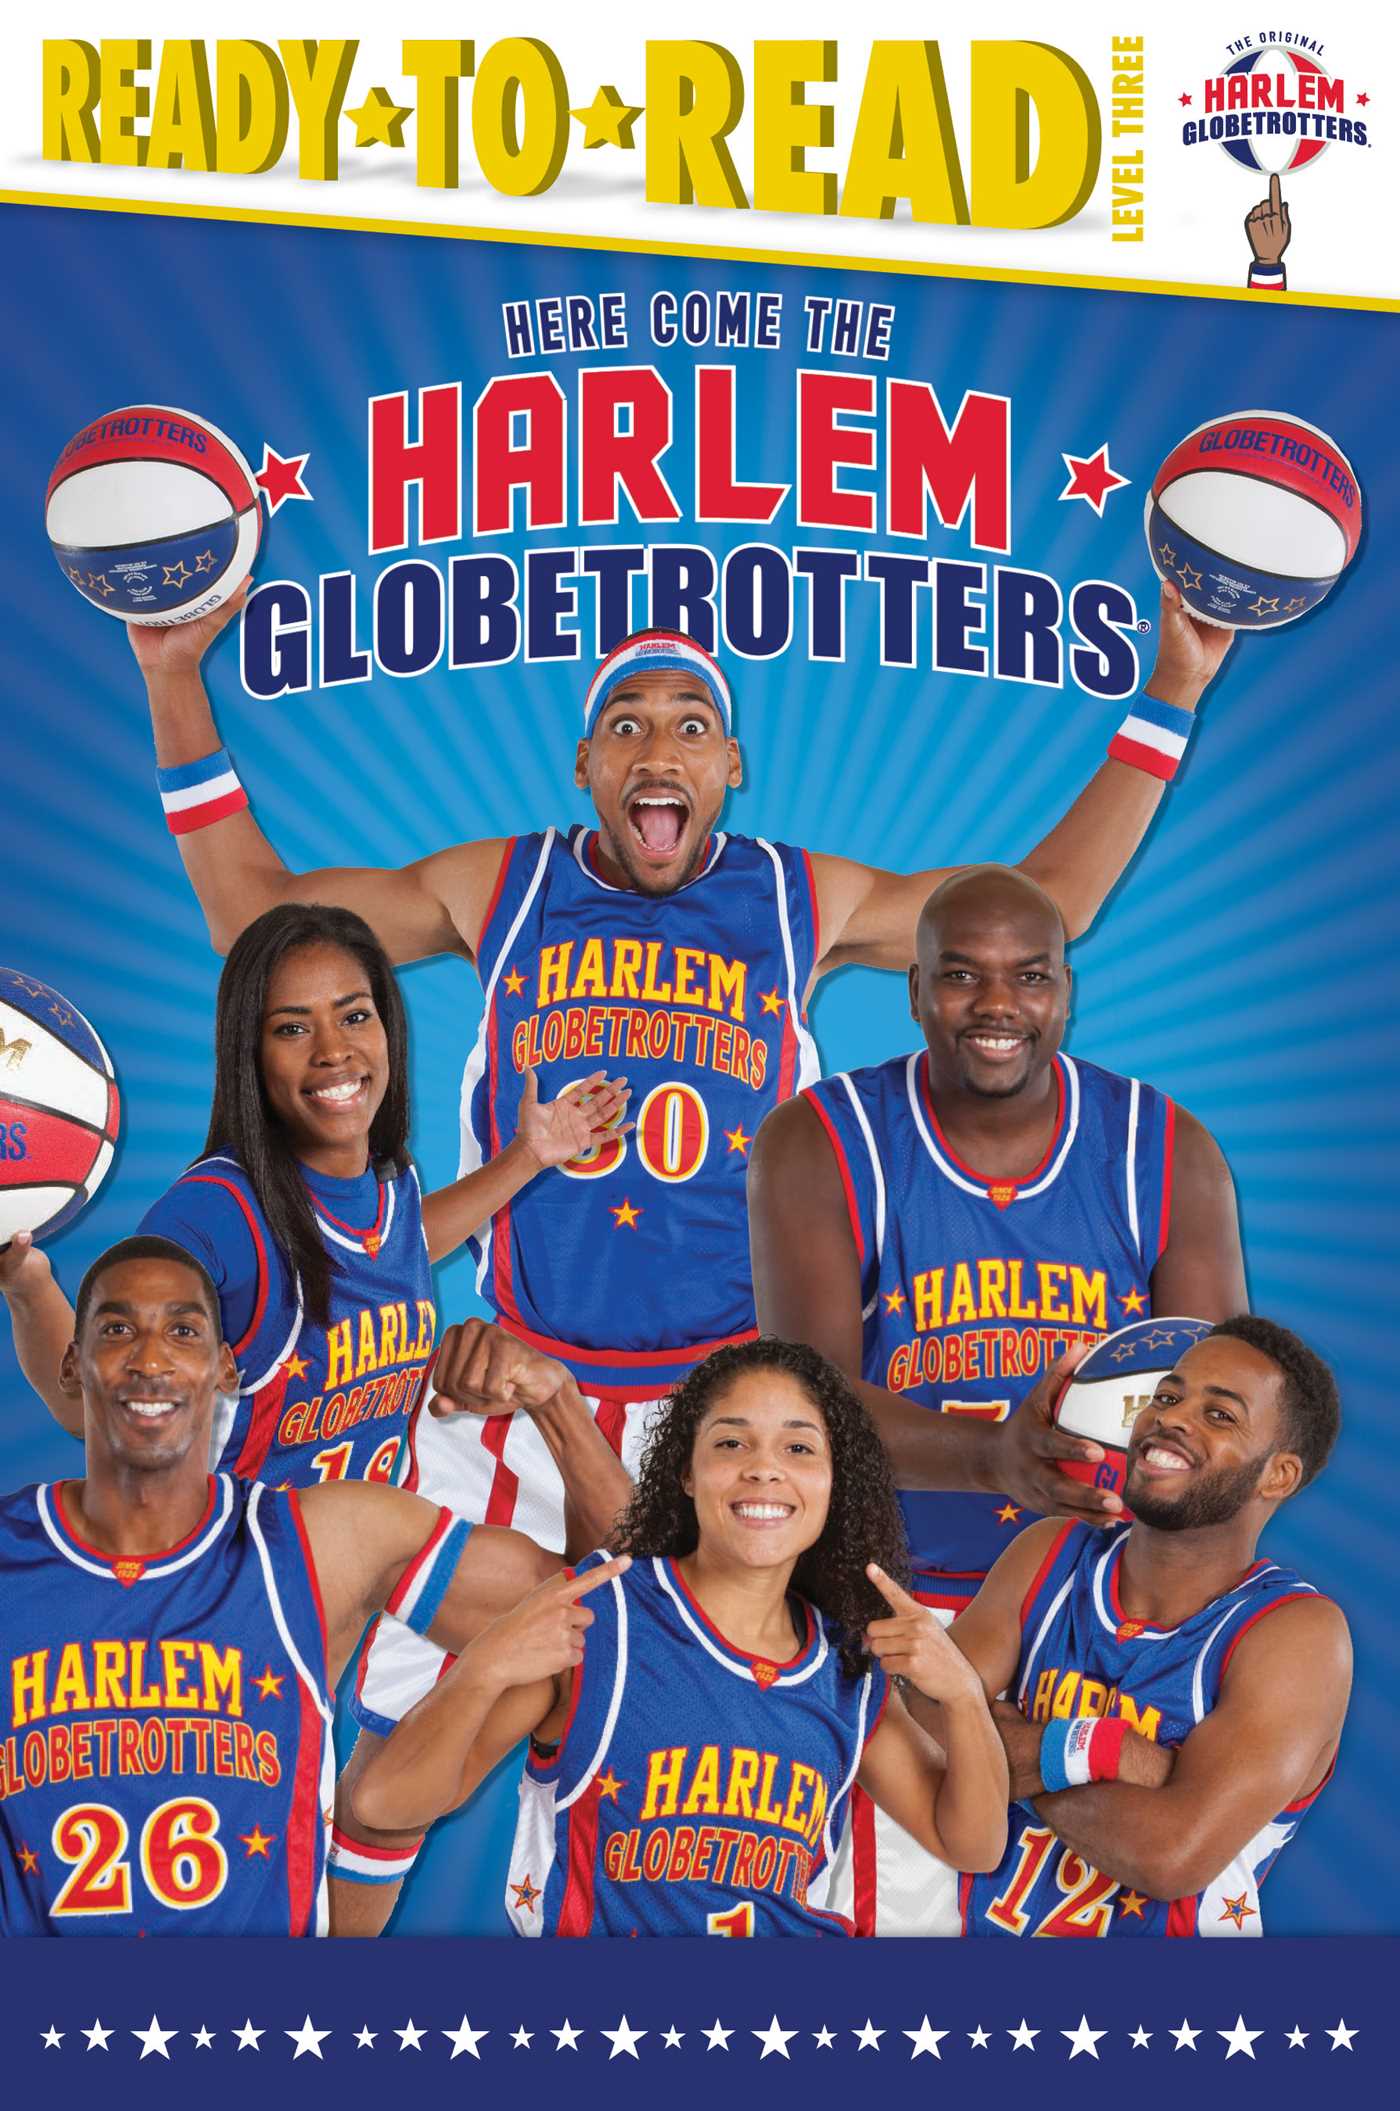 Here Come the Harlem Globetrotters | Book by Larry Dobrow | Official ...